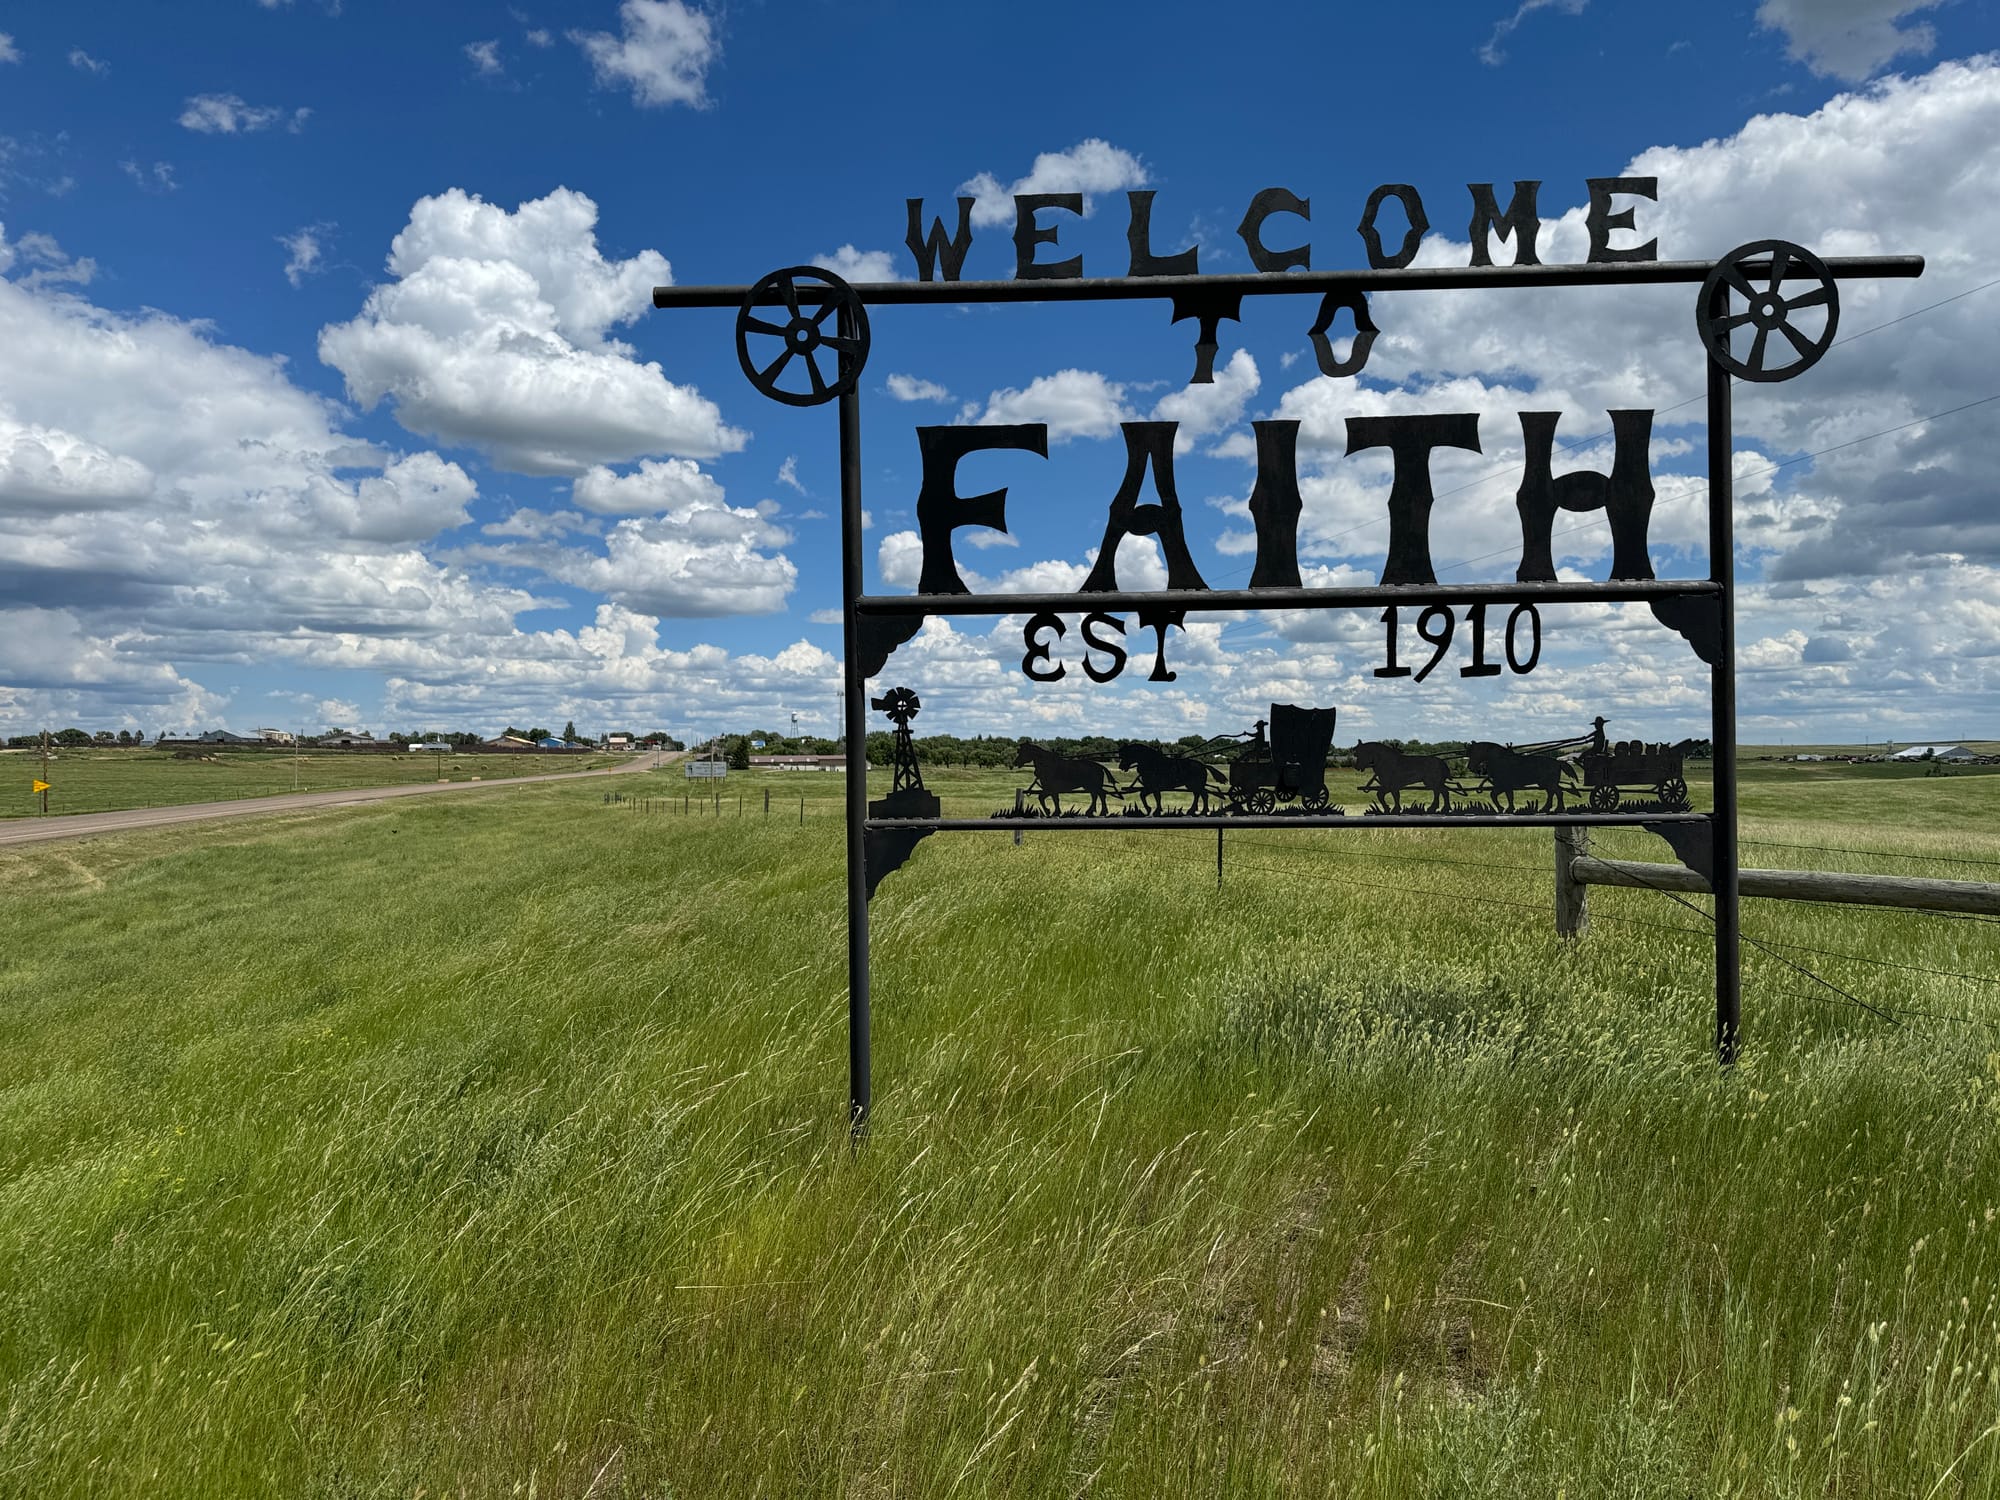 A Welcome to Faith sign is shown in the prairie of South Dakota.